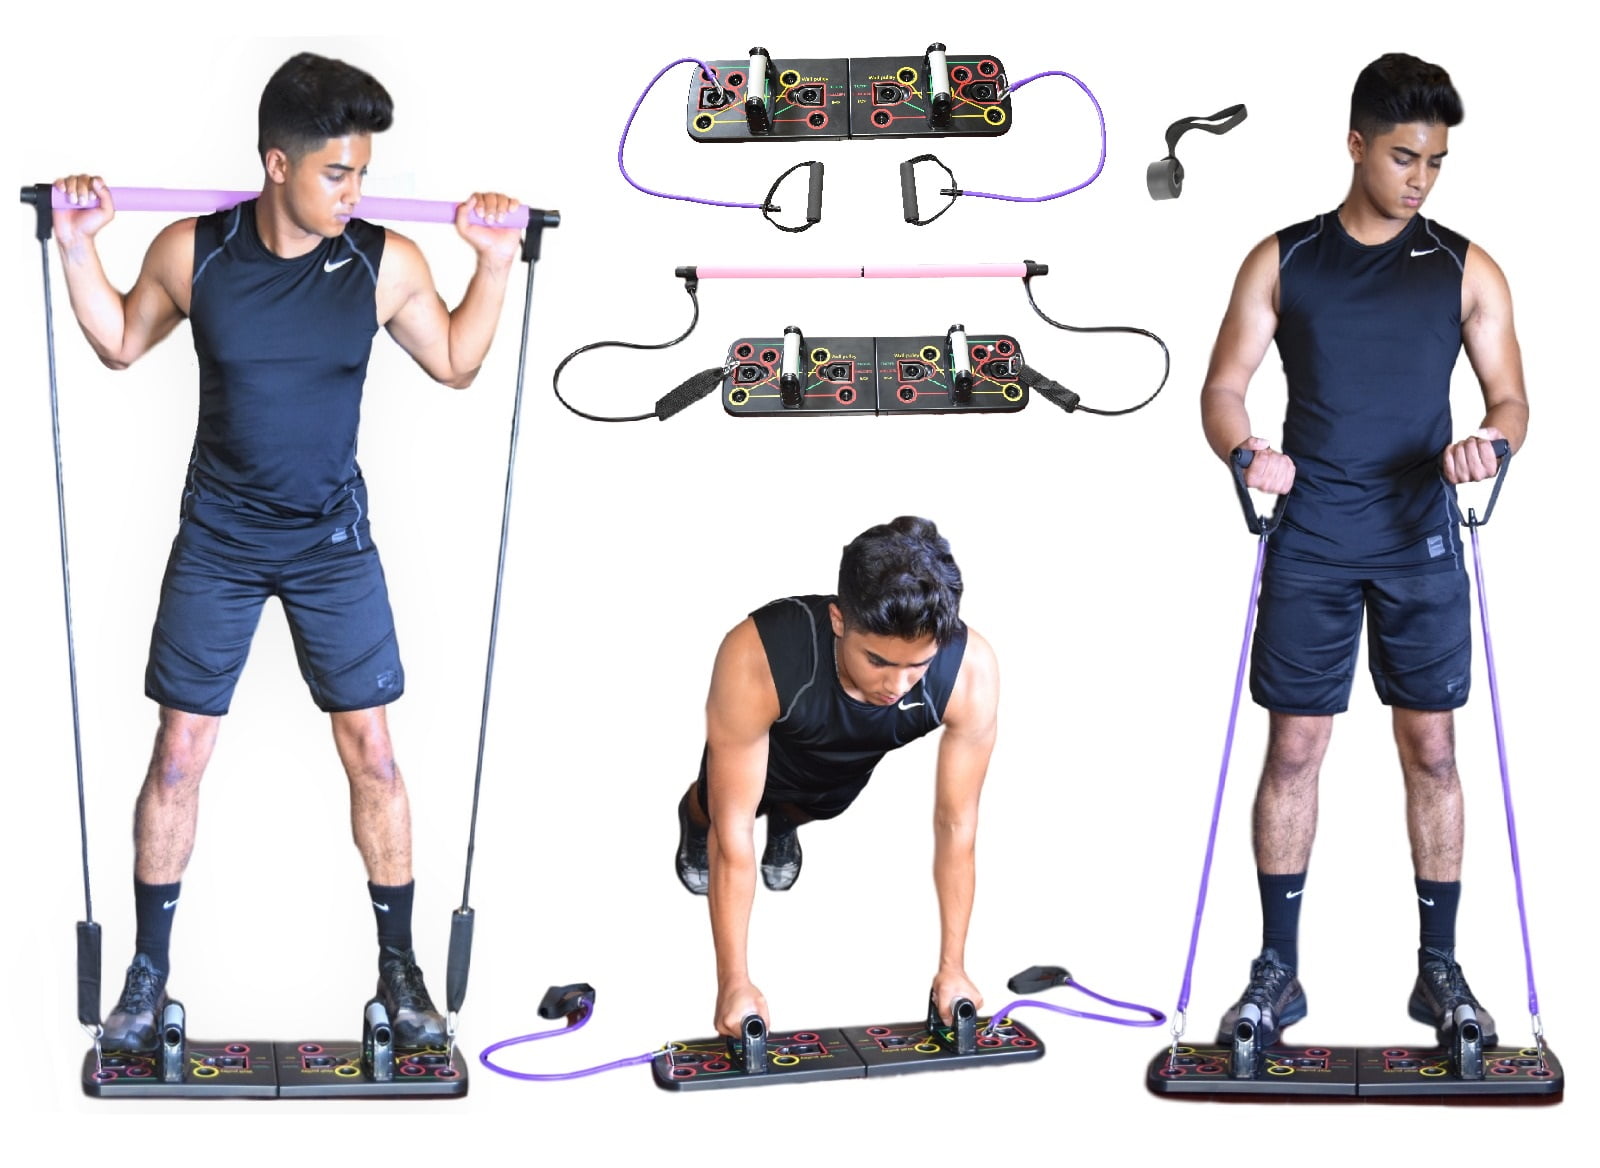 Full Portable Home Gym Workout Package in Gold w/ 4 Bands NEW BodyBoss 2.0 